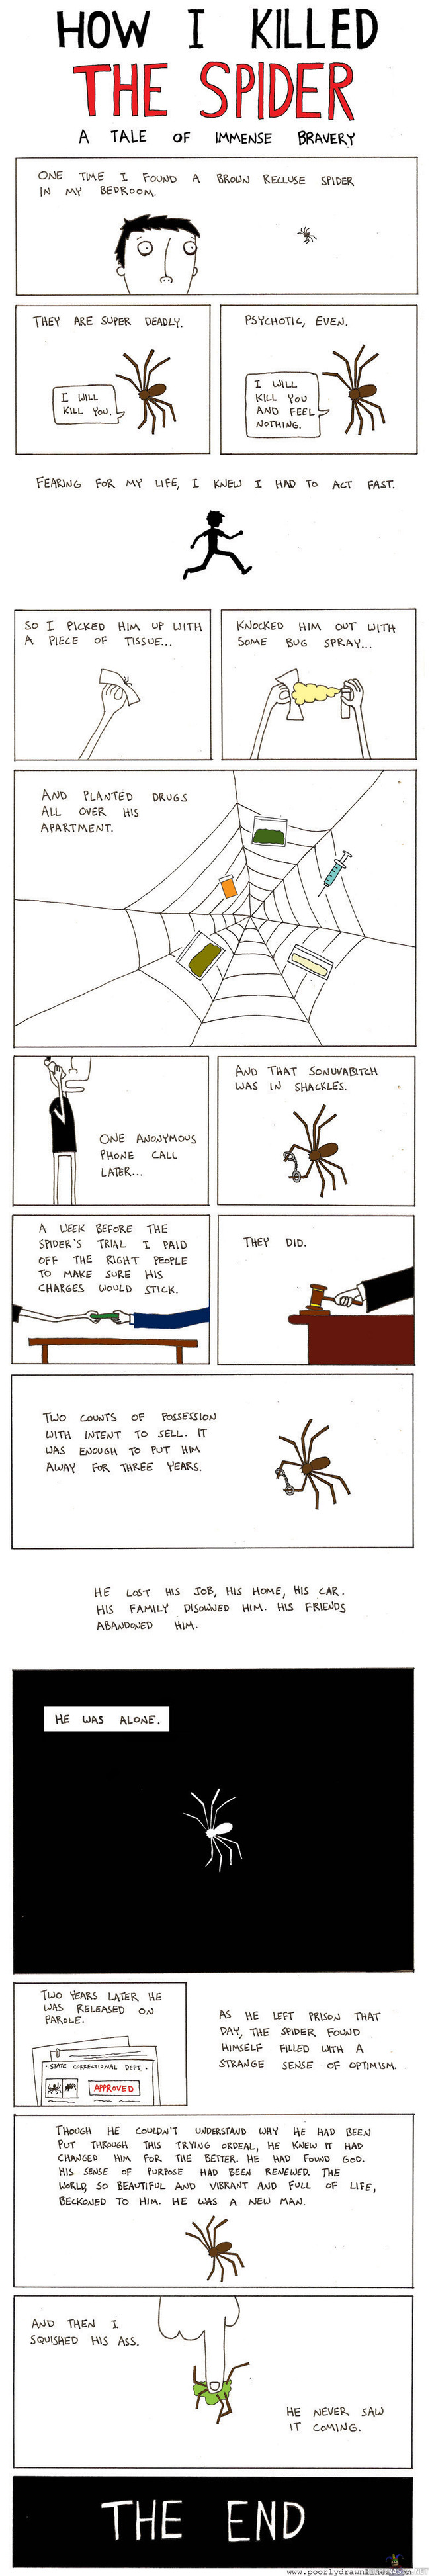 How i killed the spider